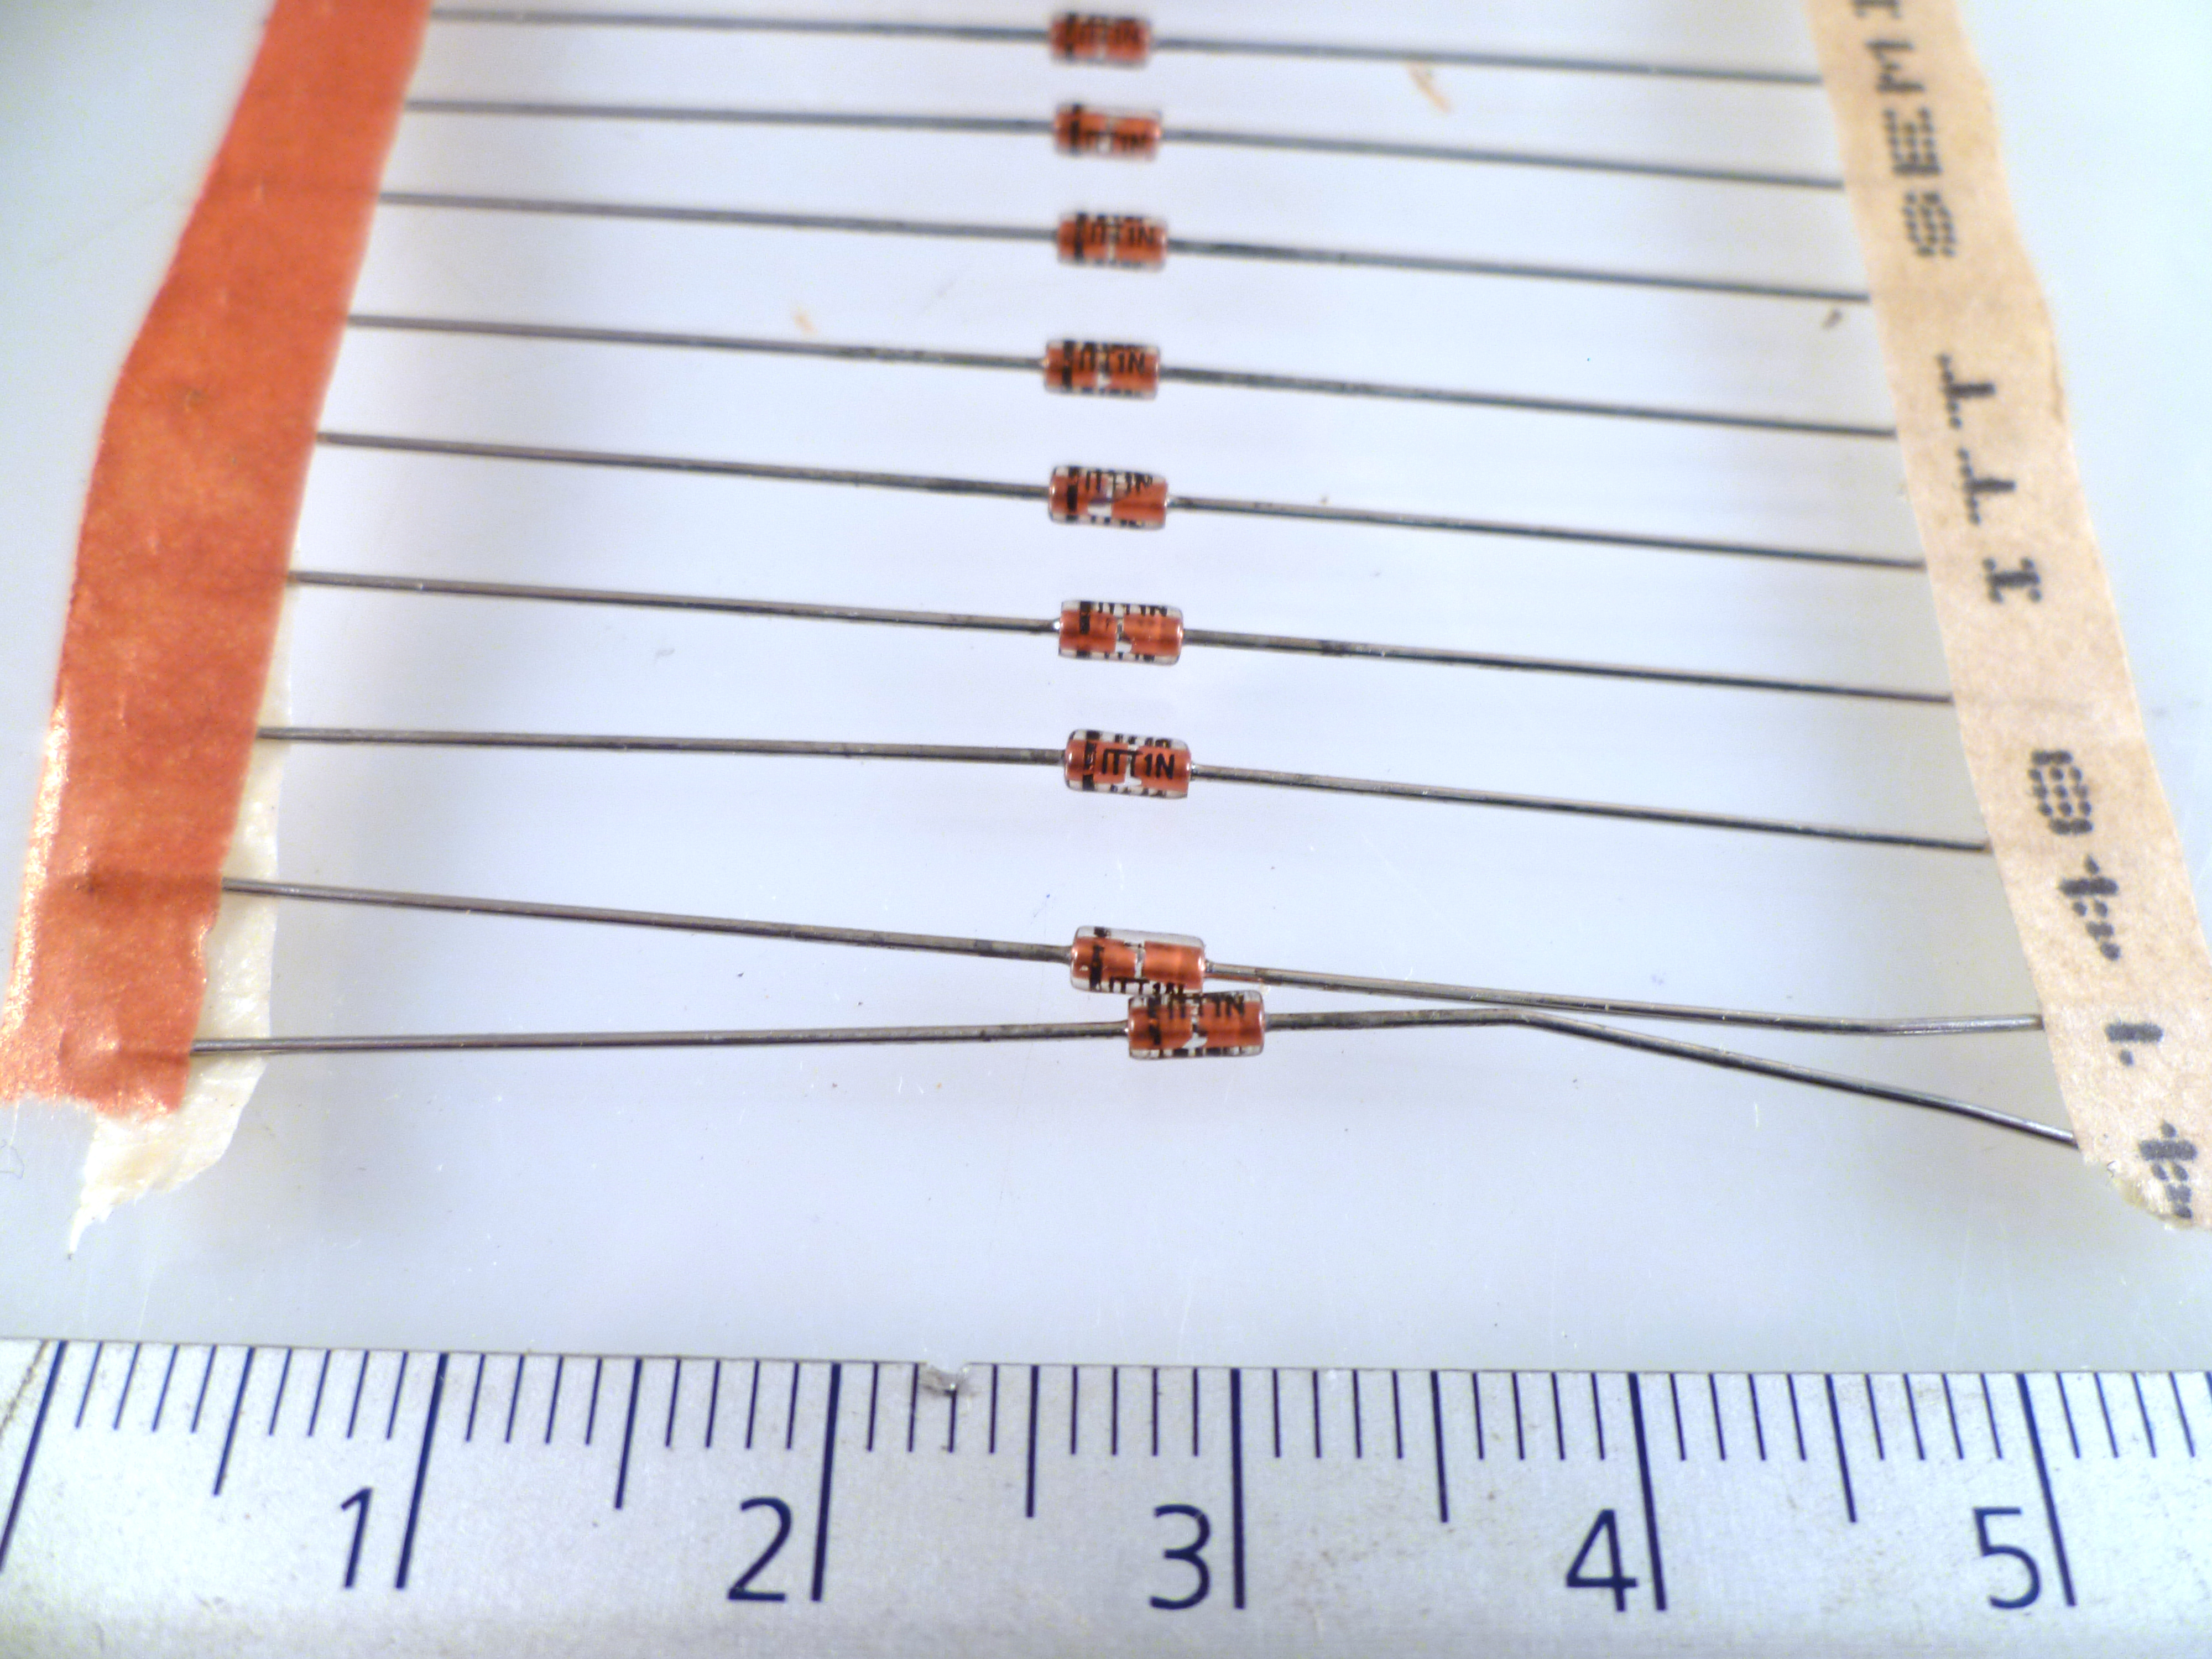 100pcs 1N 4148 High Speed Switching Diodes